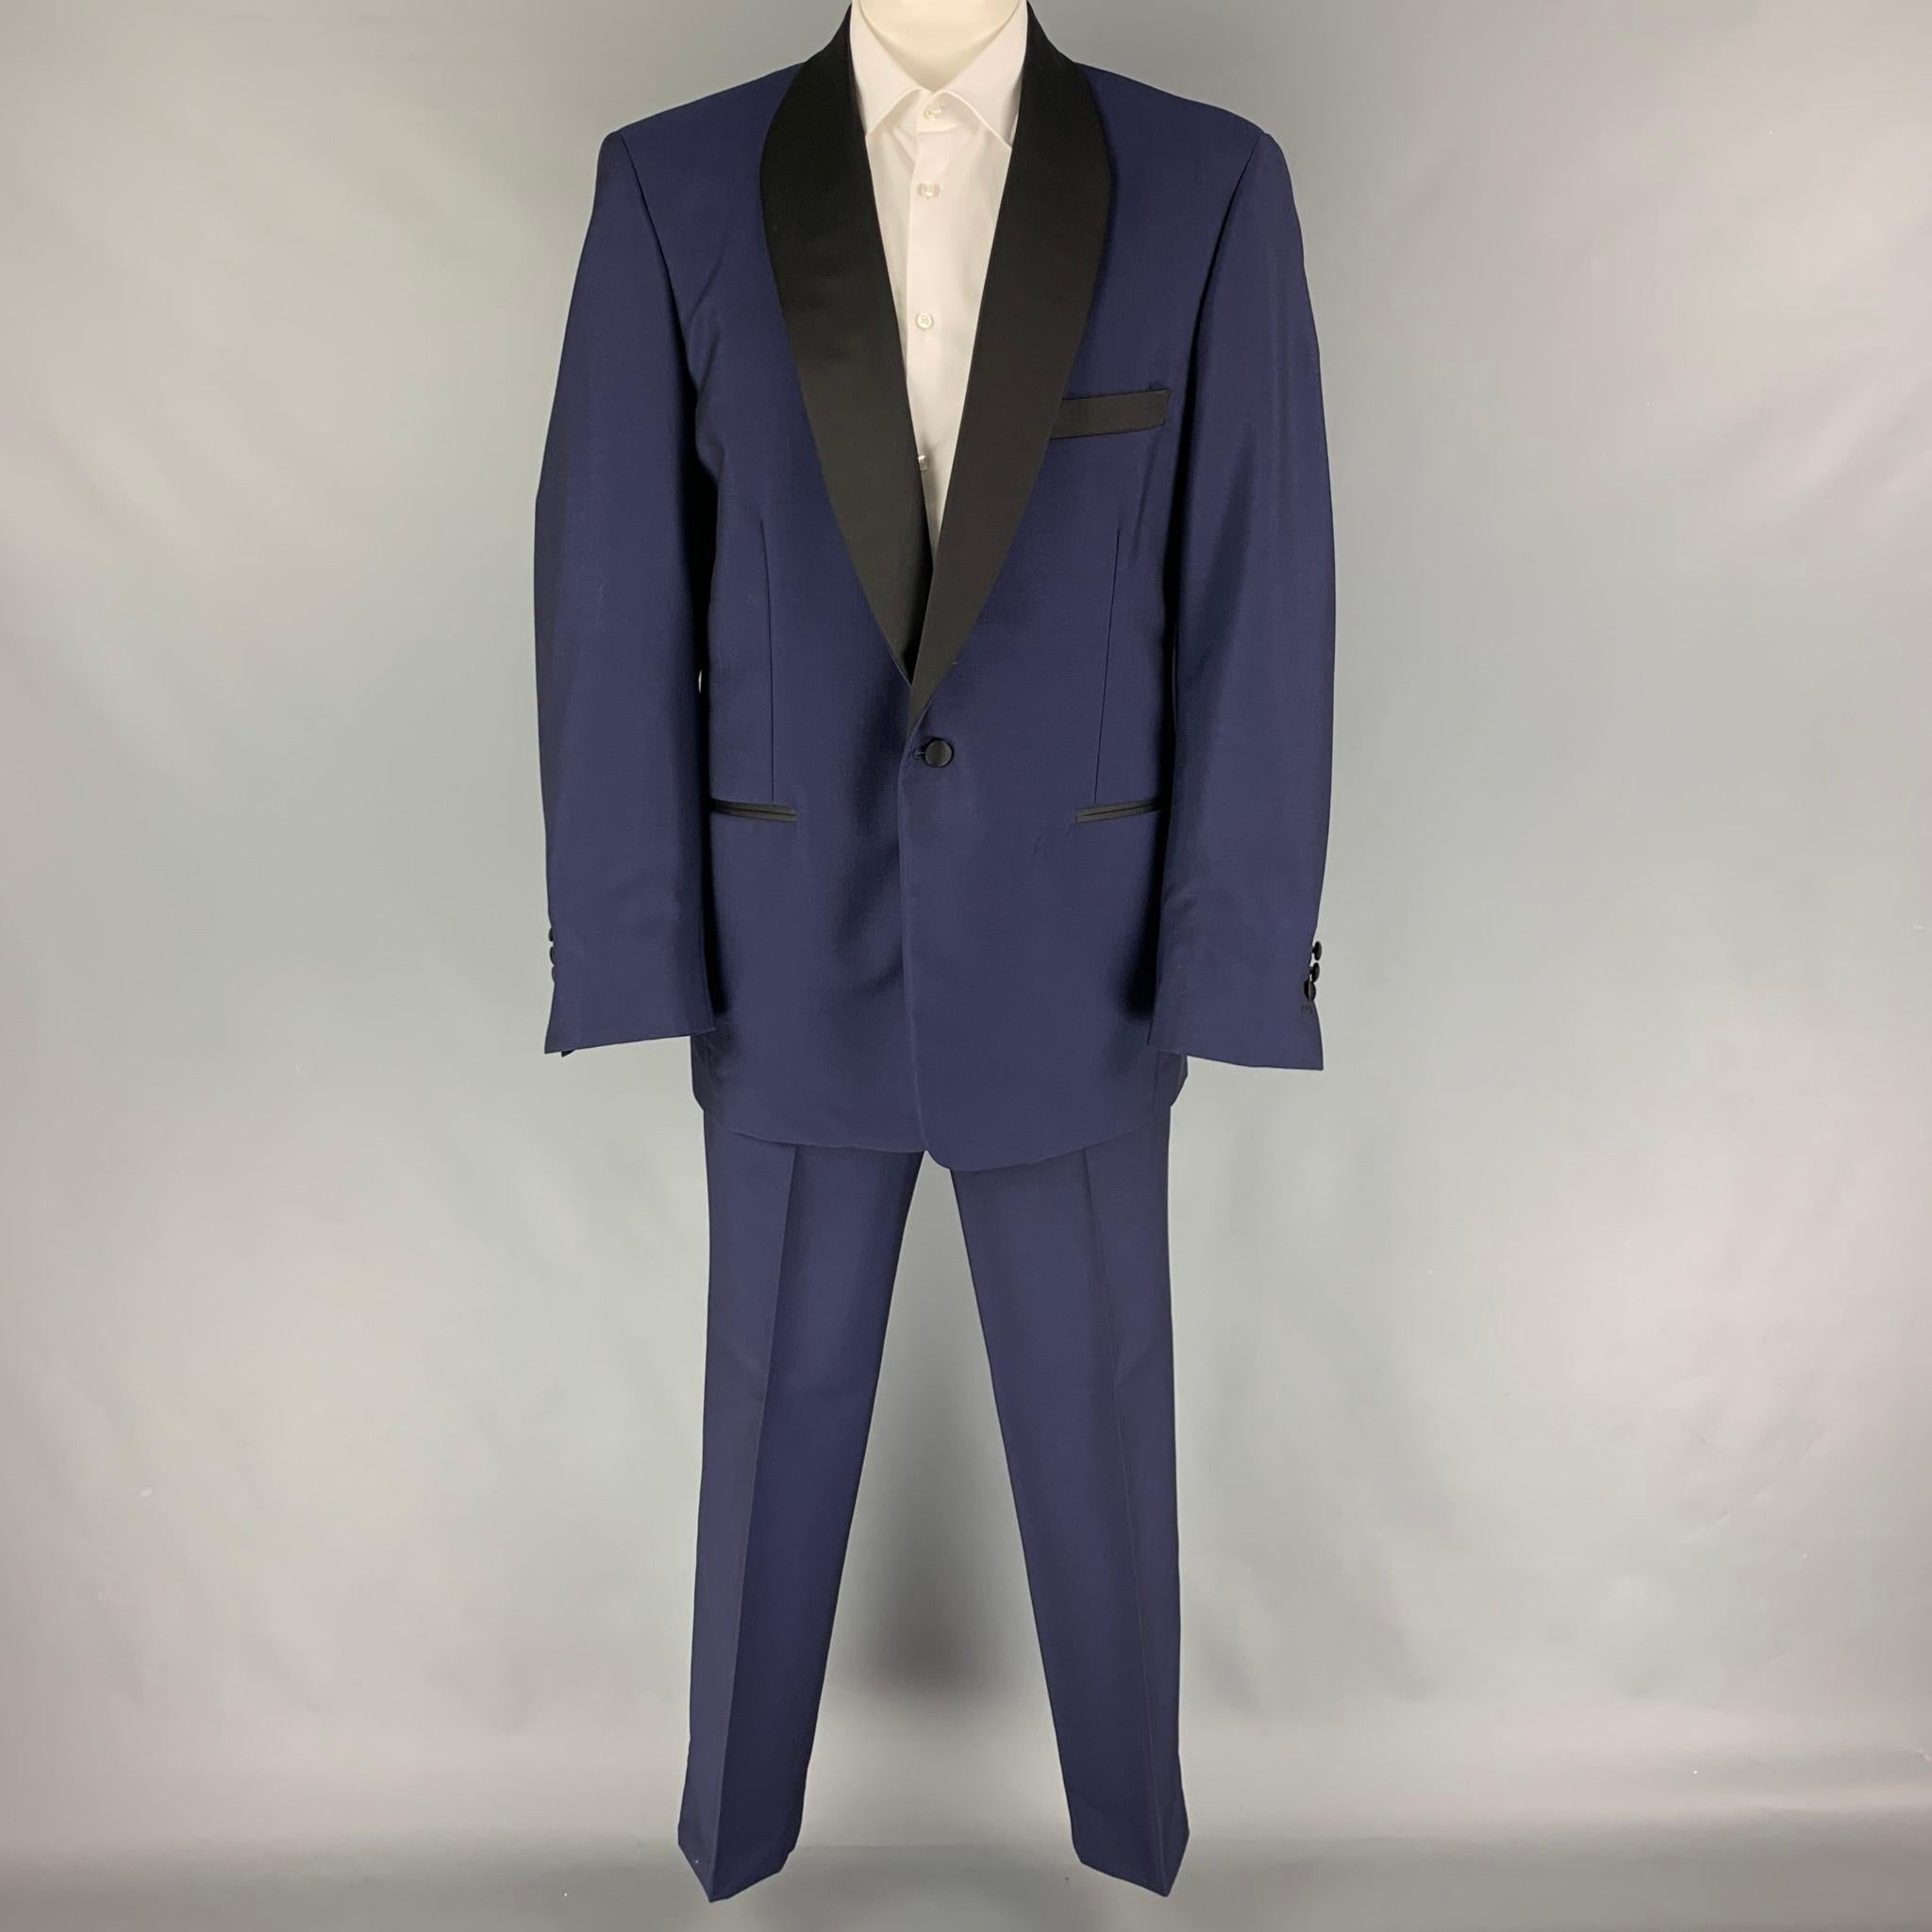 HOLLAND & SHERRY suit comes in a navy & black material and includes a single breasted, single button sport coat with a shawl collar and matching flat front trousers. Made in USA.

Very Good Pre-Owned Condition. Fabric tag removed.
Marked: Size tag